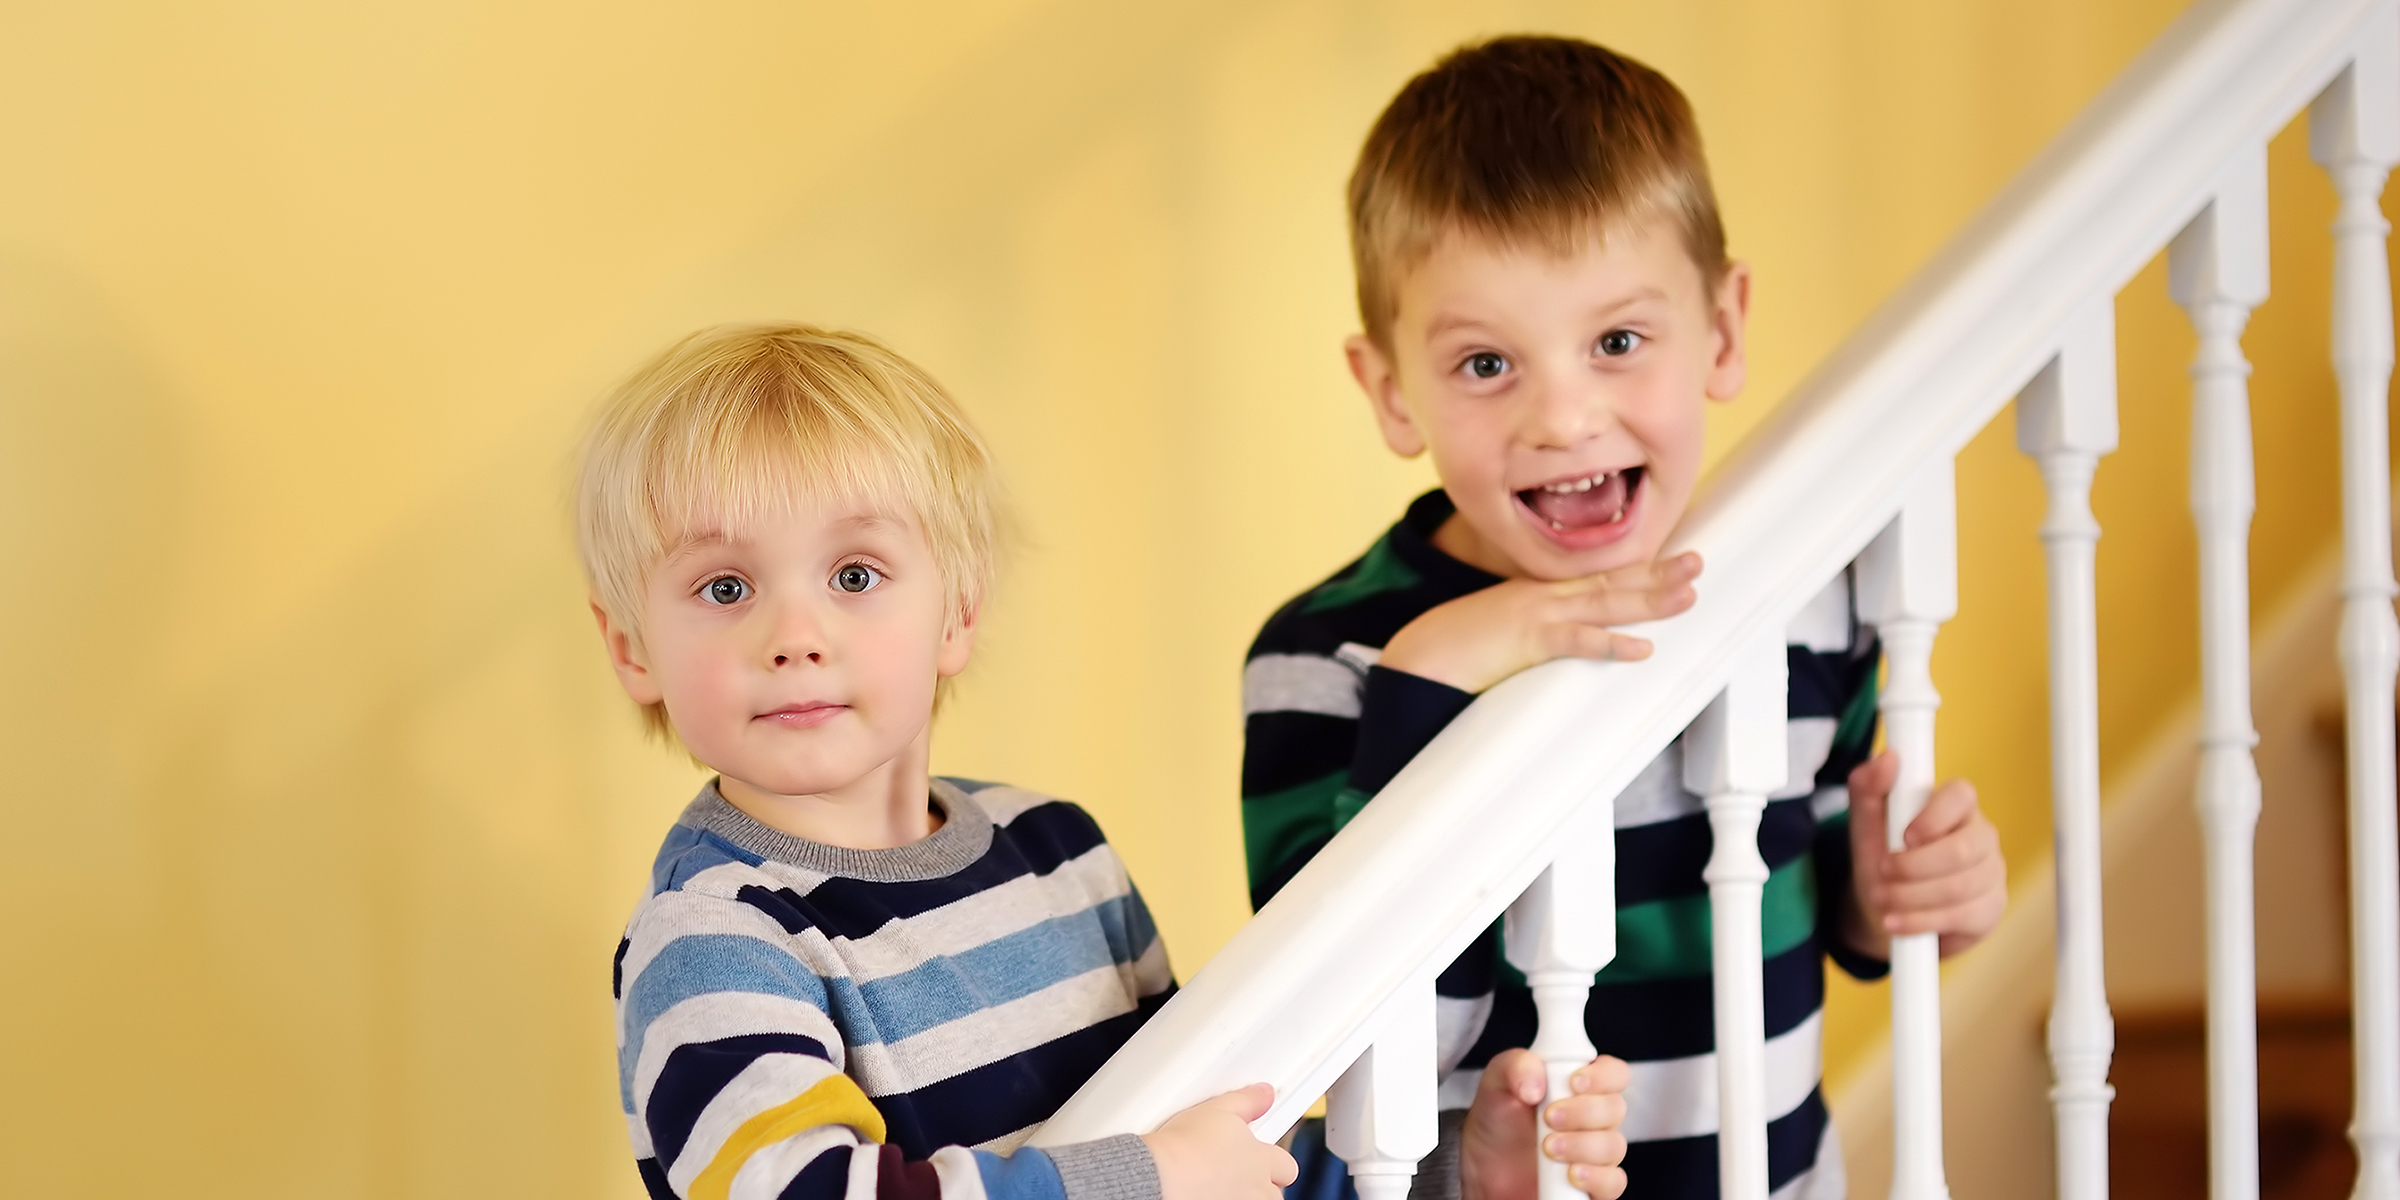 Two boys standing on a staircase | Source: Shutterstock